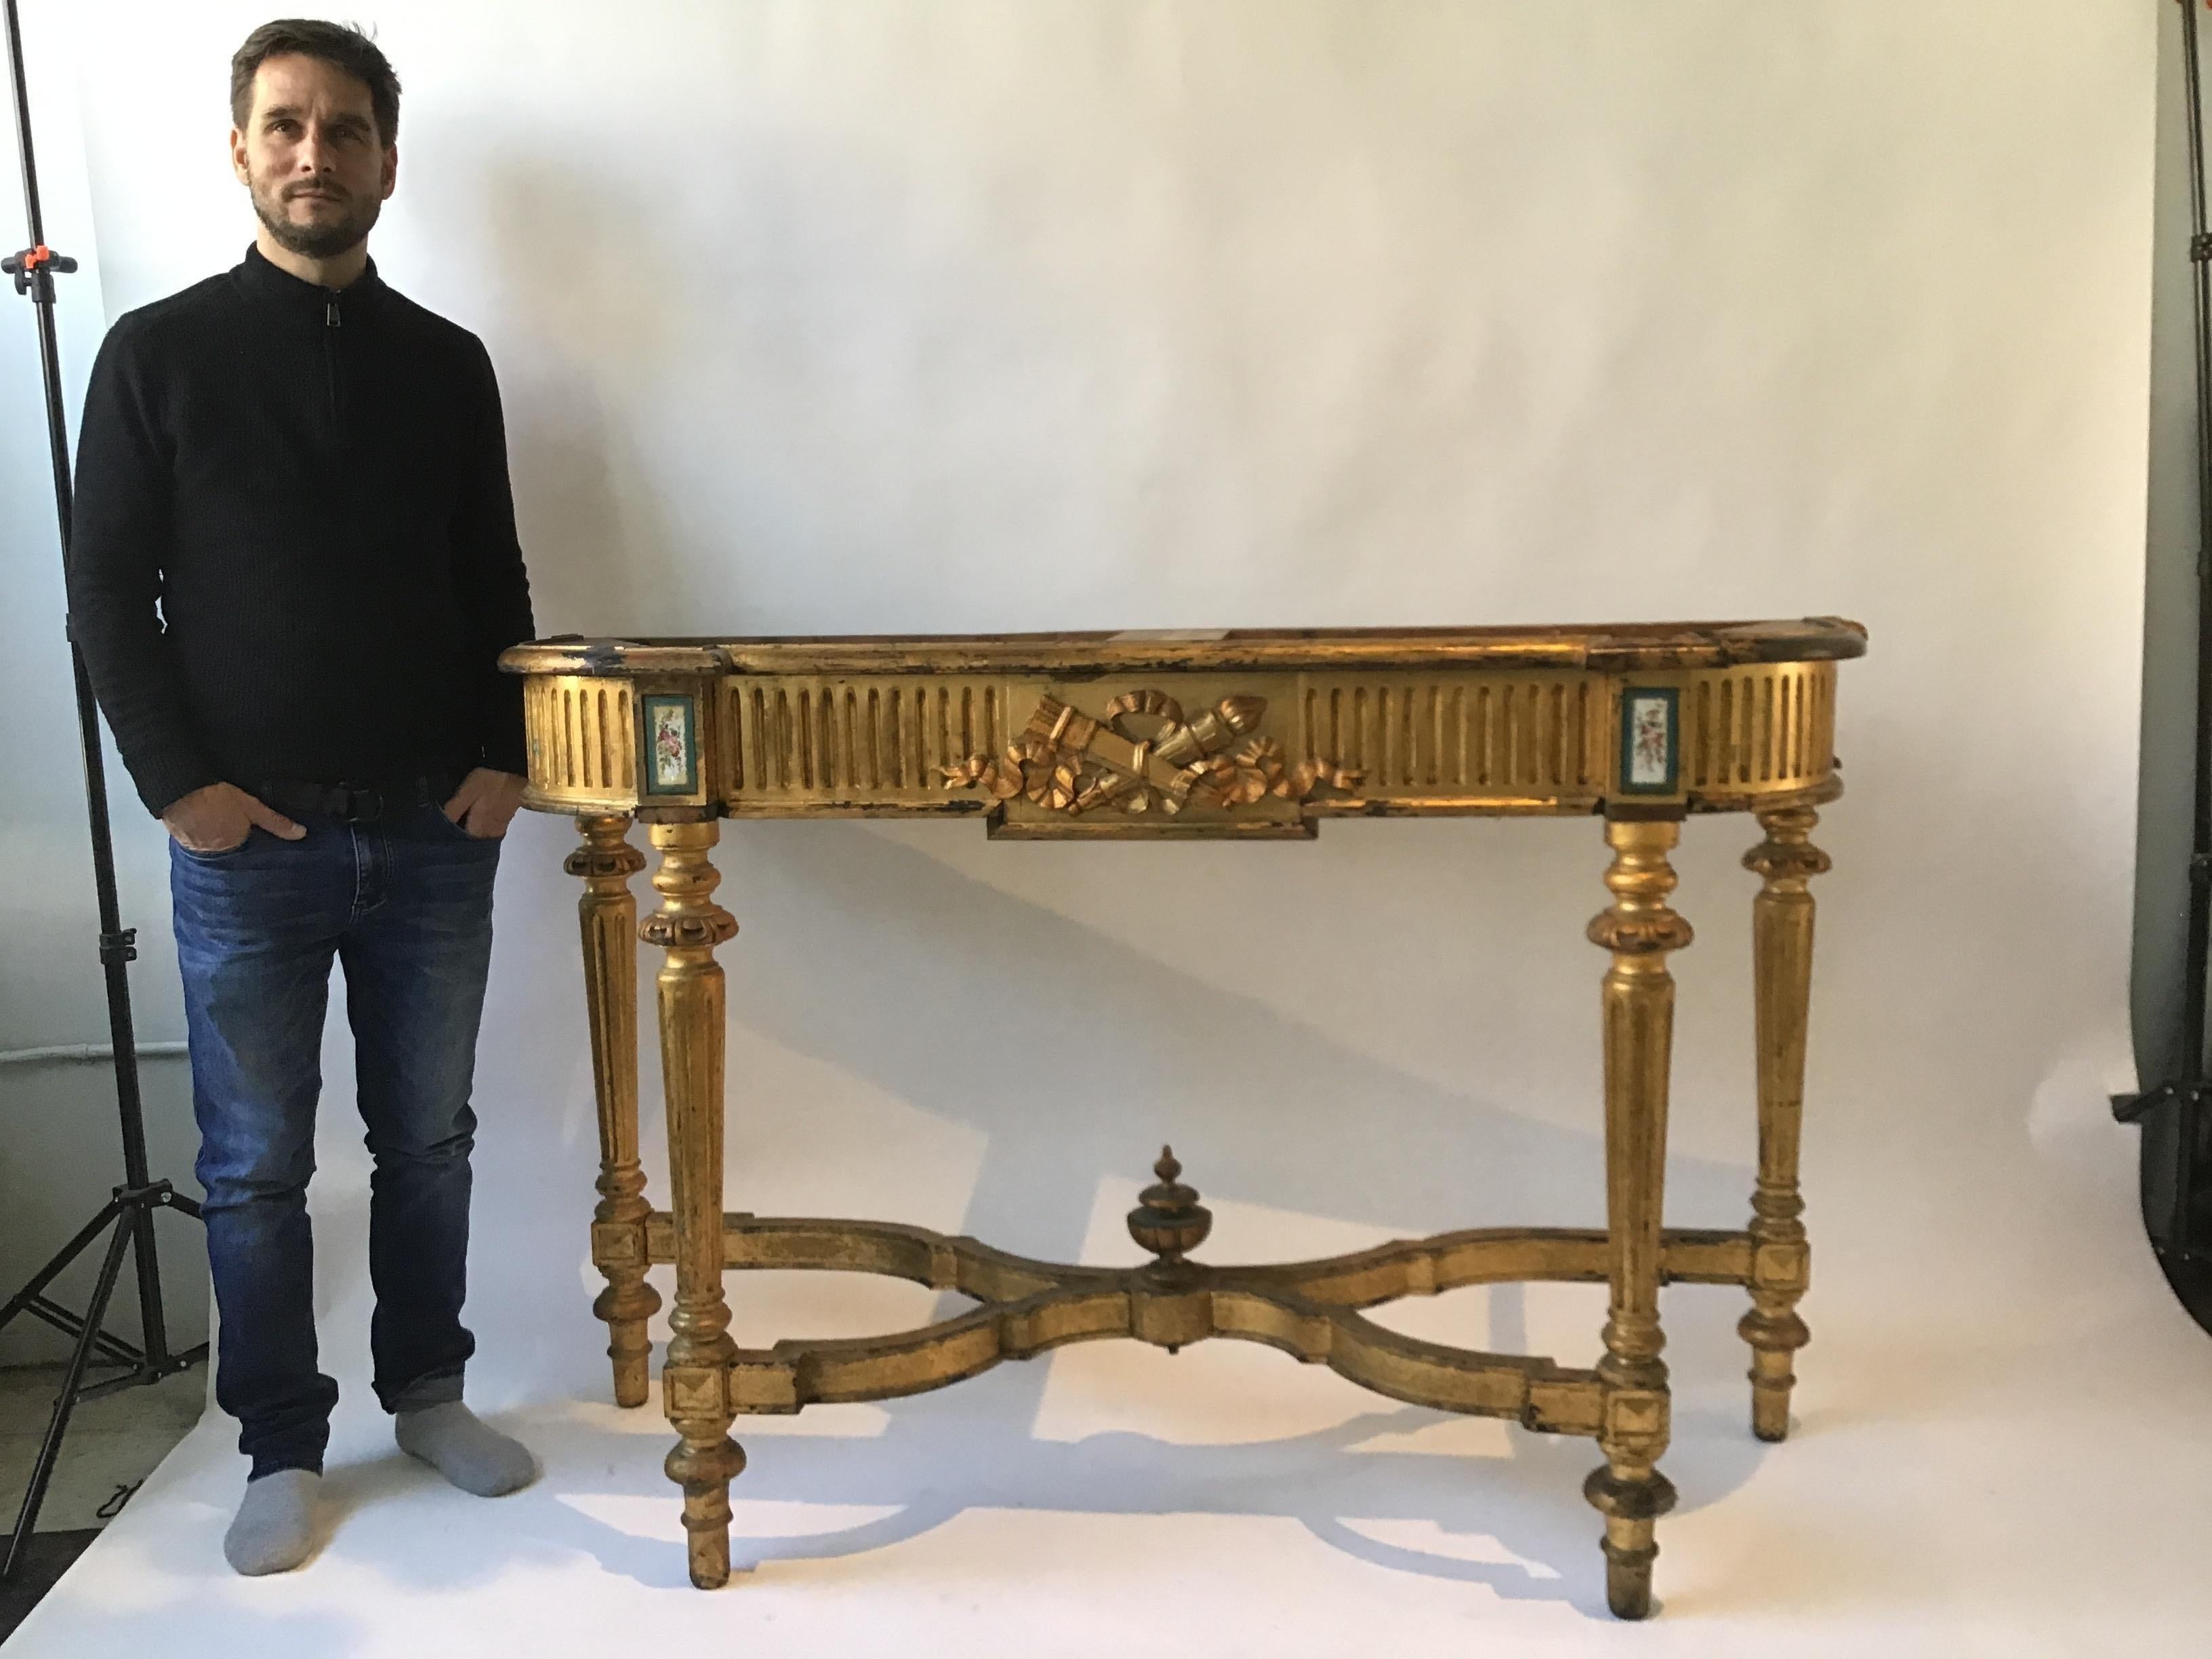 1880s gilt wood console with hand painted ceramic plaques. No top. Some small pieces of molding missing as seen in images 10 and 14.